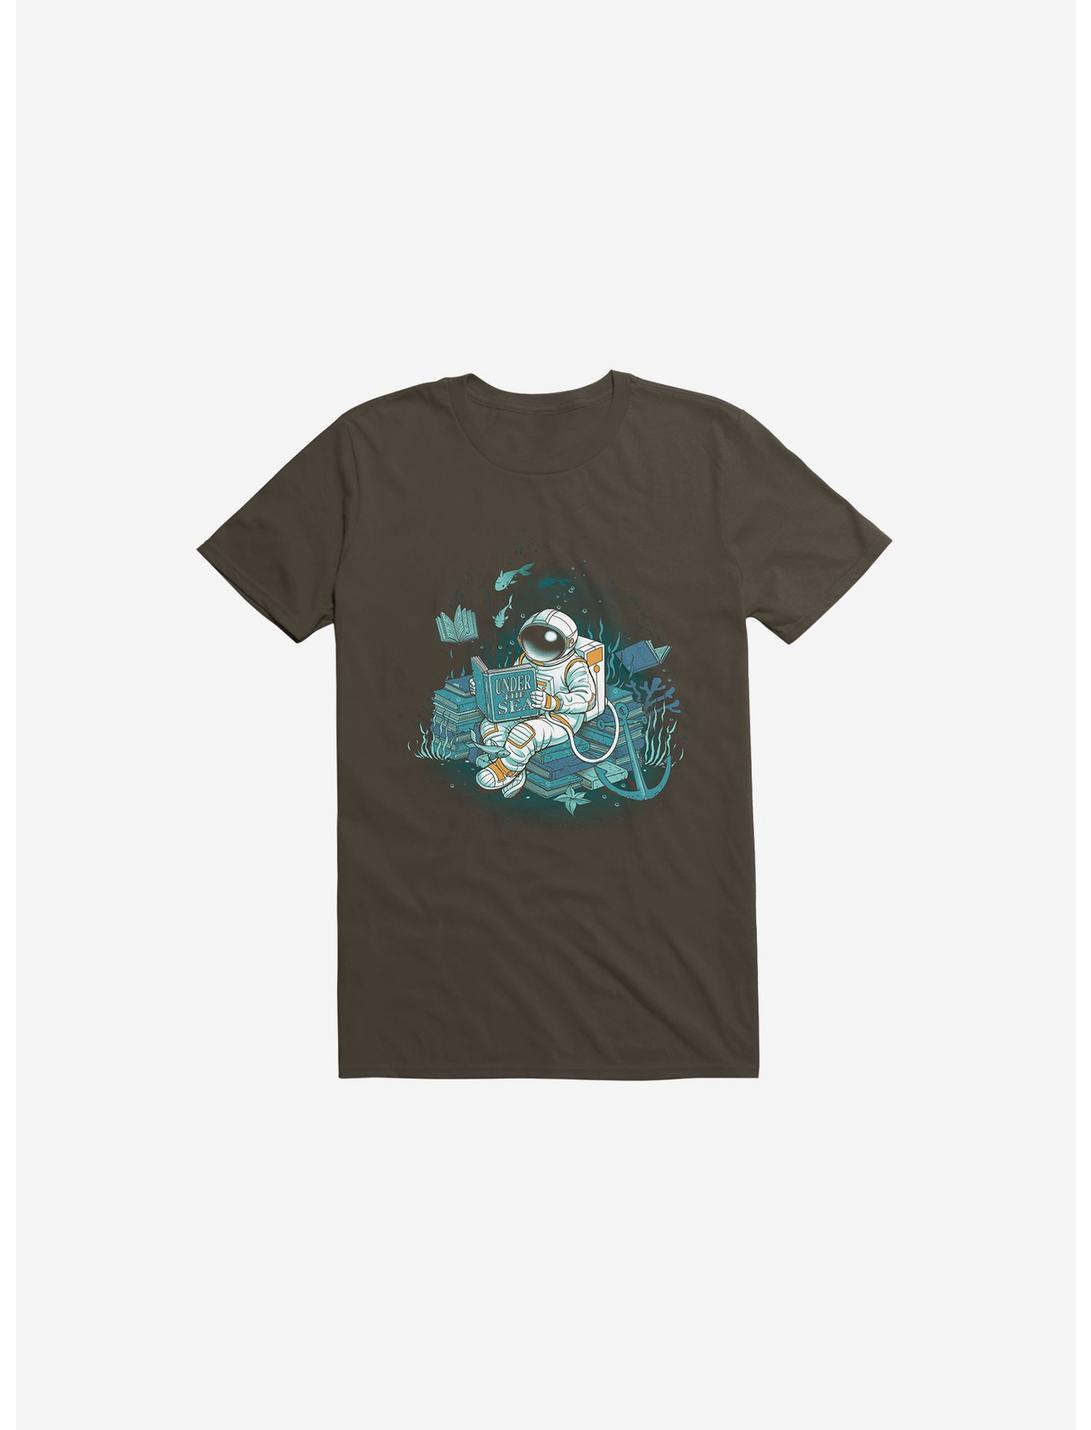 A Reader Lives A Thousand Lives: Cosmonaut Under The Sea T-Shirt, BROWN, hi-res